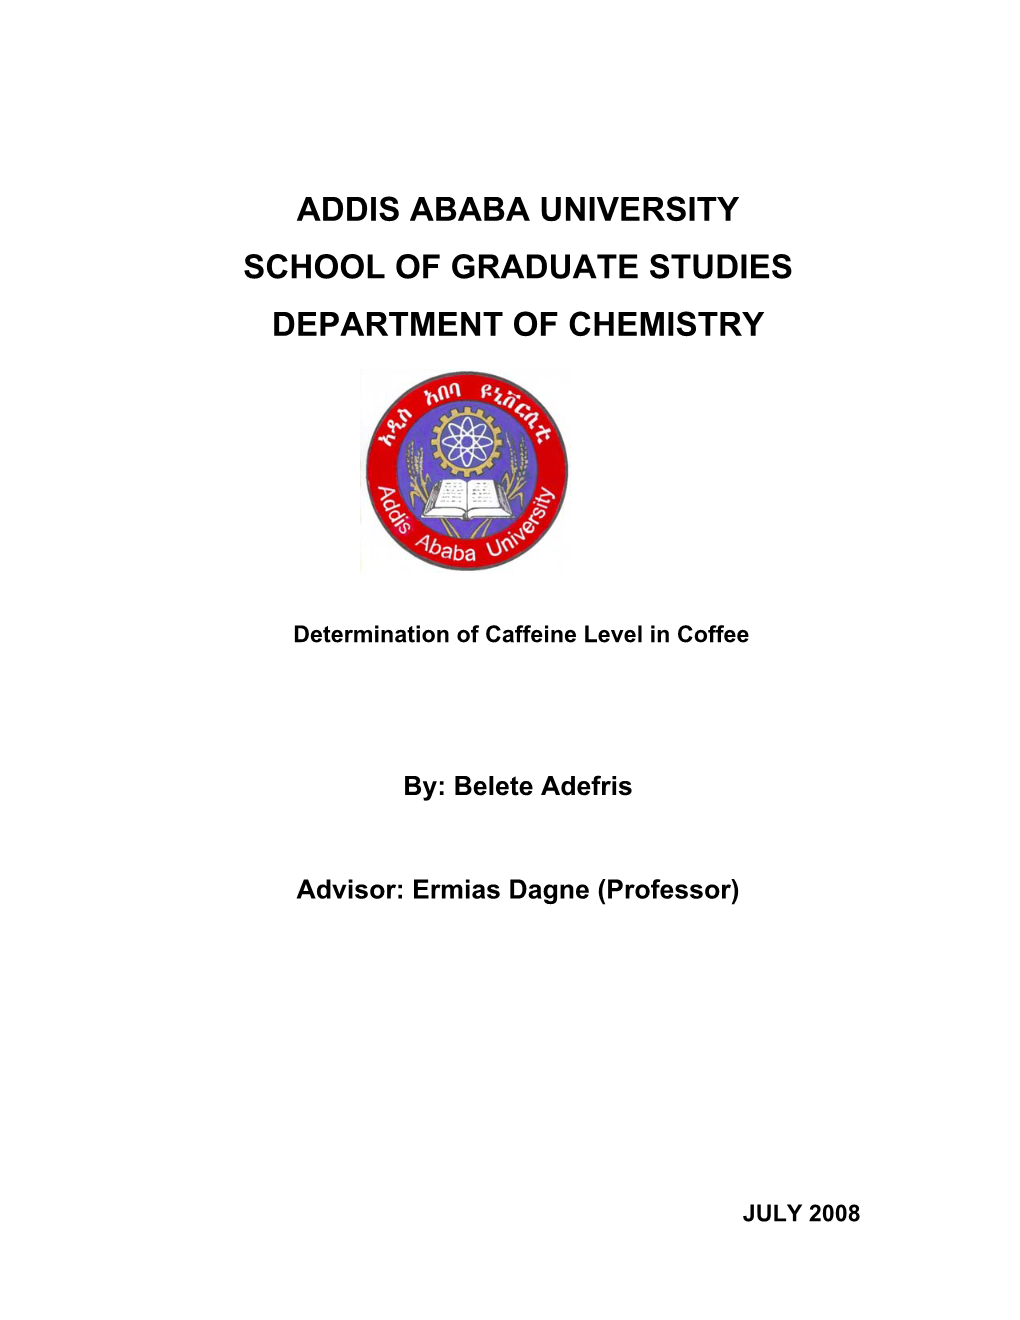 Determination of Caffeine Level in Raw, Roasted and Brewed Coffee by CAMAG High Performance Thin Layer Chromatography and Quanti